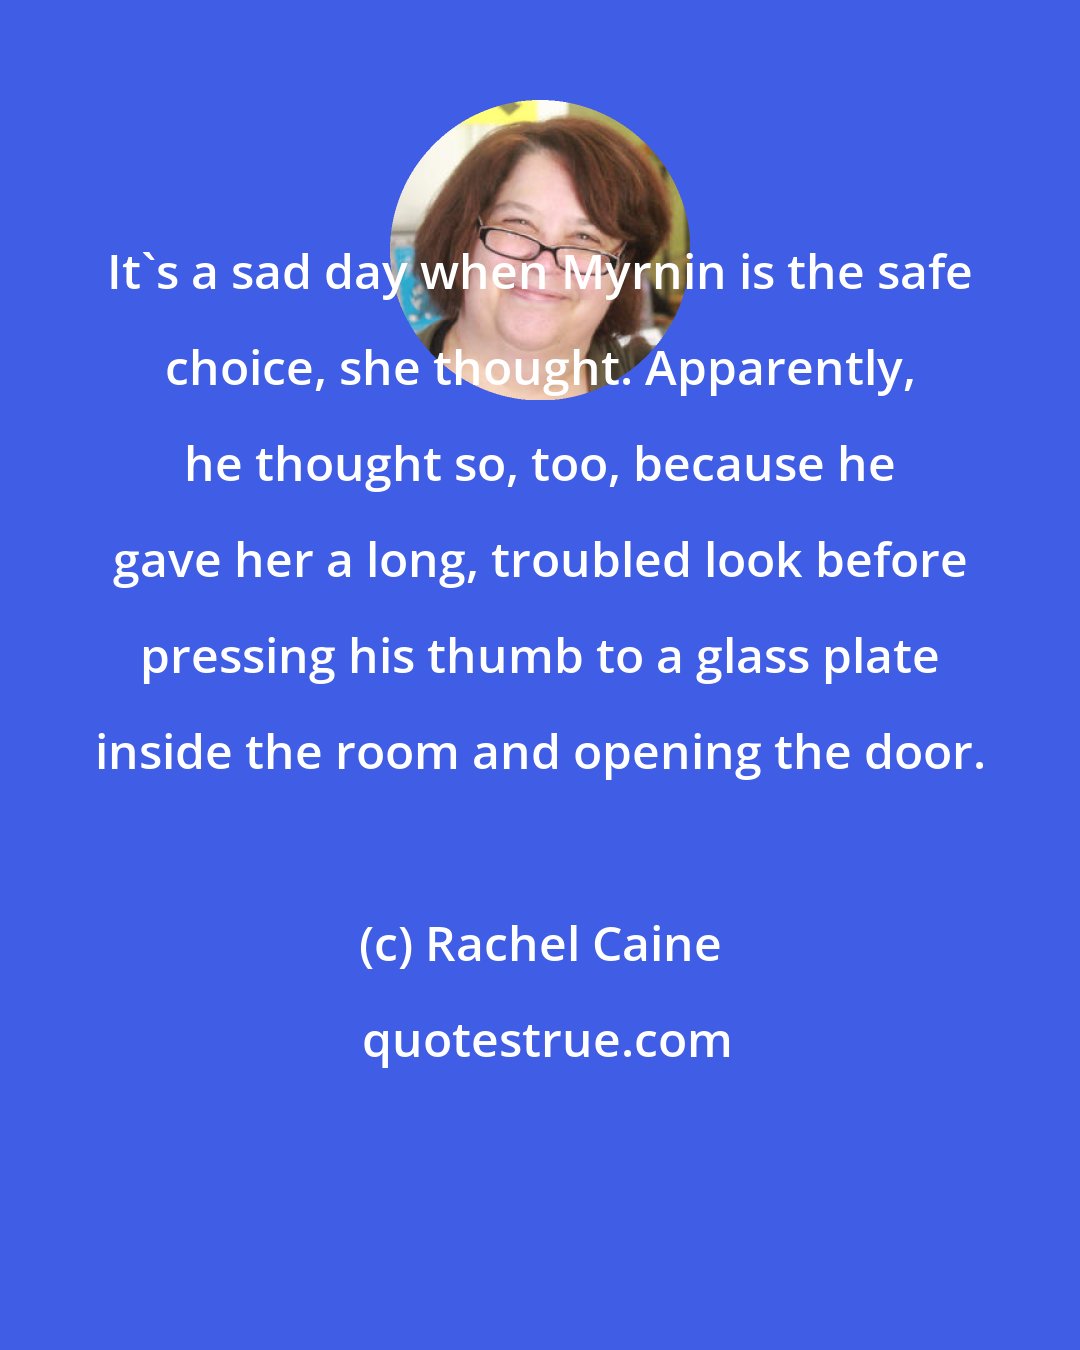 Rachel Caine: It's a sad day when Myrnin is the safe choice, she thought. Apparently, he thought so, too, because he gave her a long, troubled look before pressing his thumb to a glass plate inside the room and opening the door.